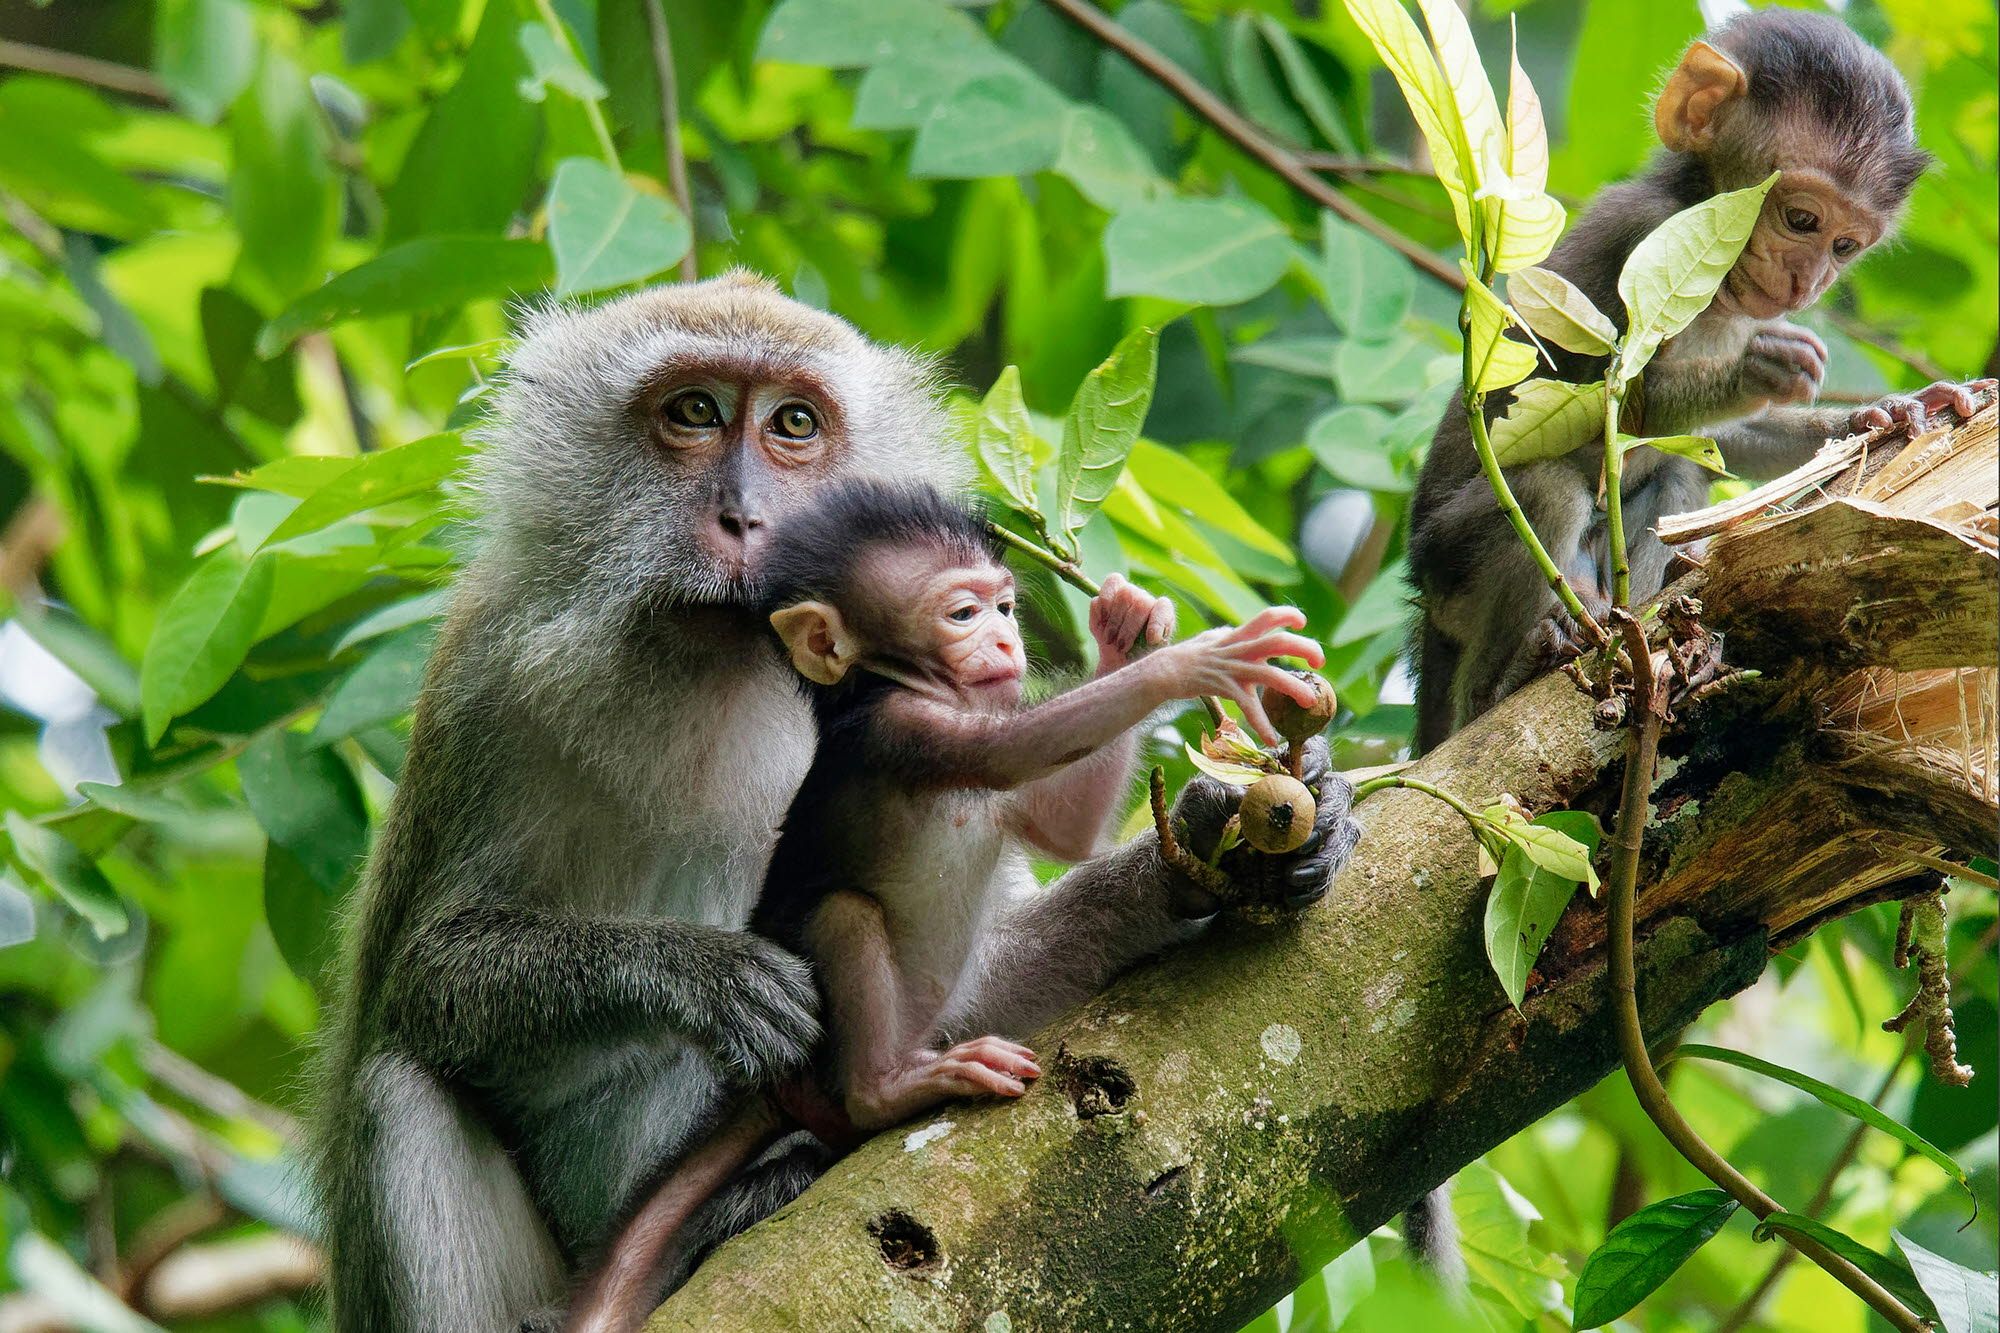 A baby monkey and mother